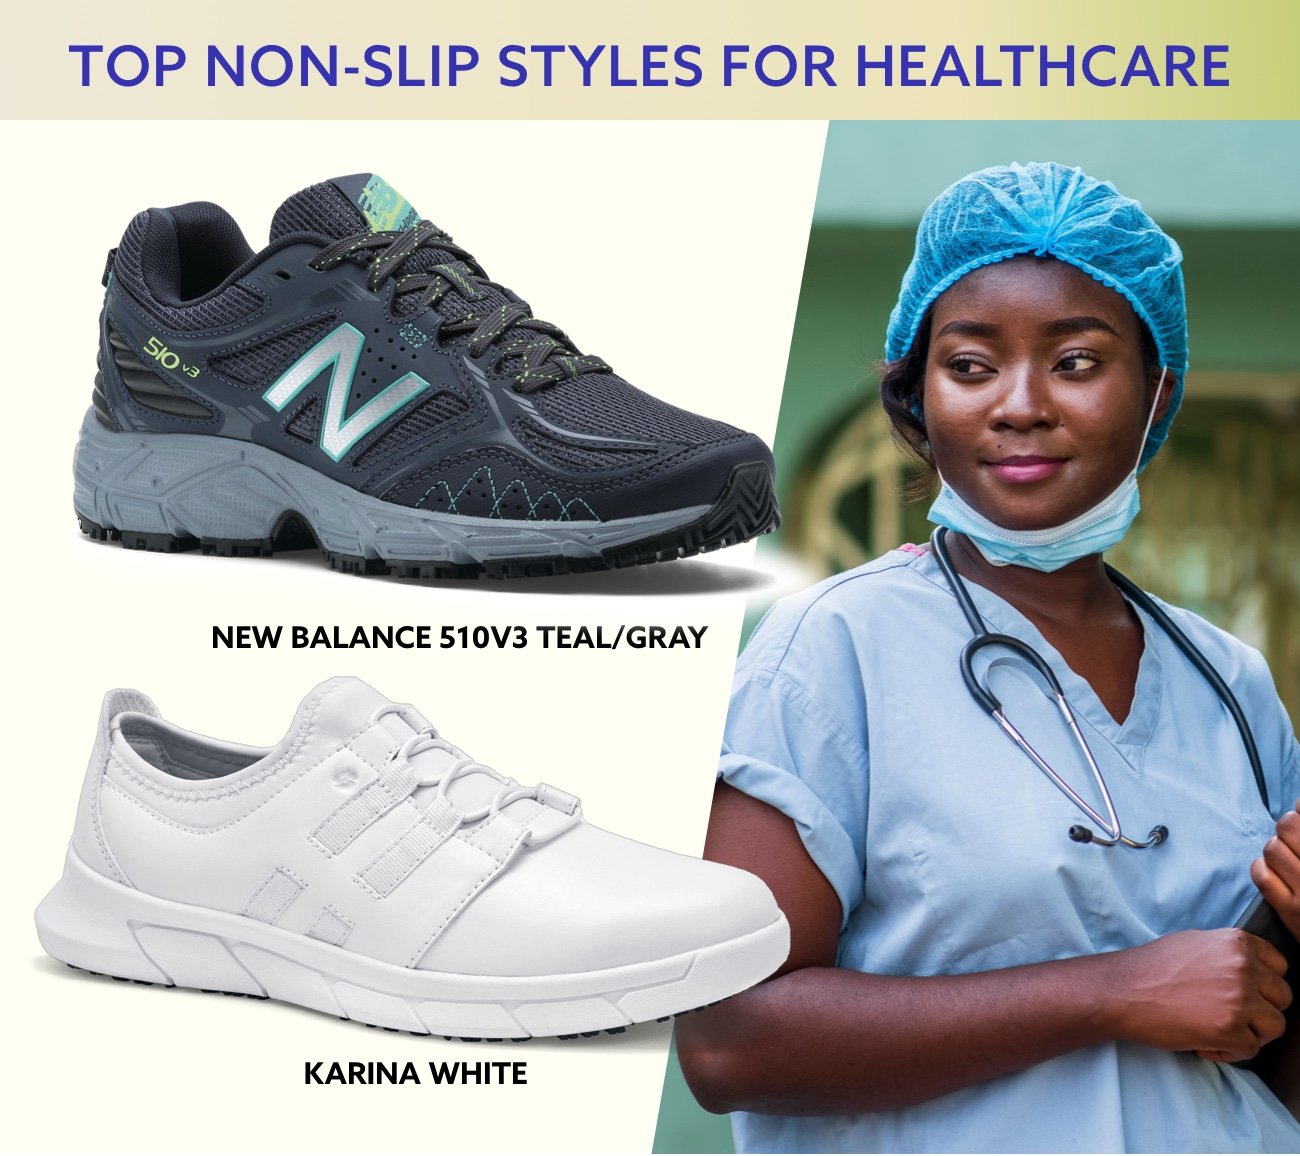 Shop Slip-Resistant Styles for Healthcare.